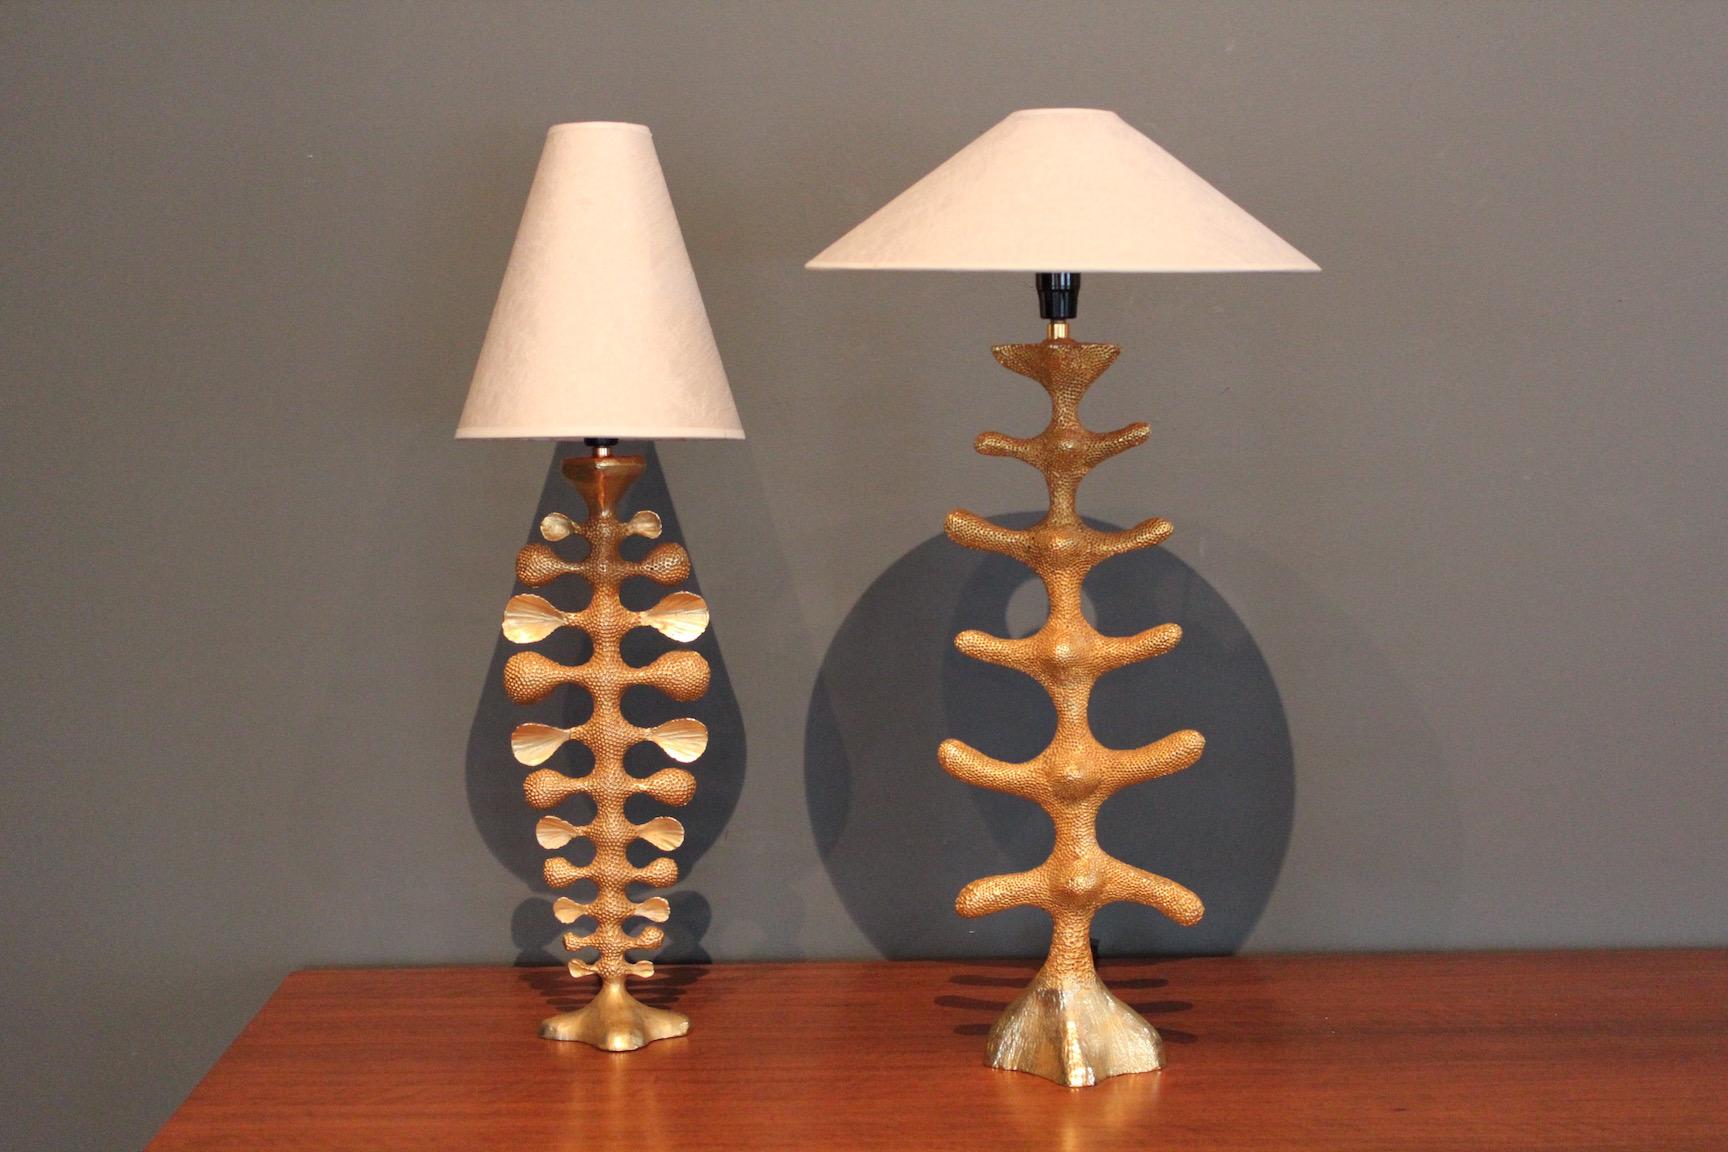 A pair of heavy cast bronze lamps by Pierre Casenove for Fondica.